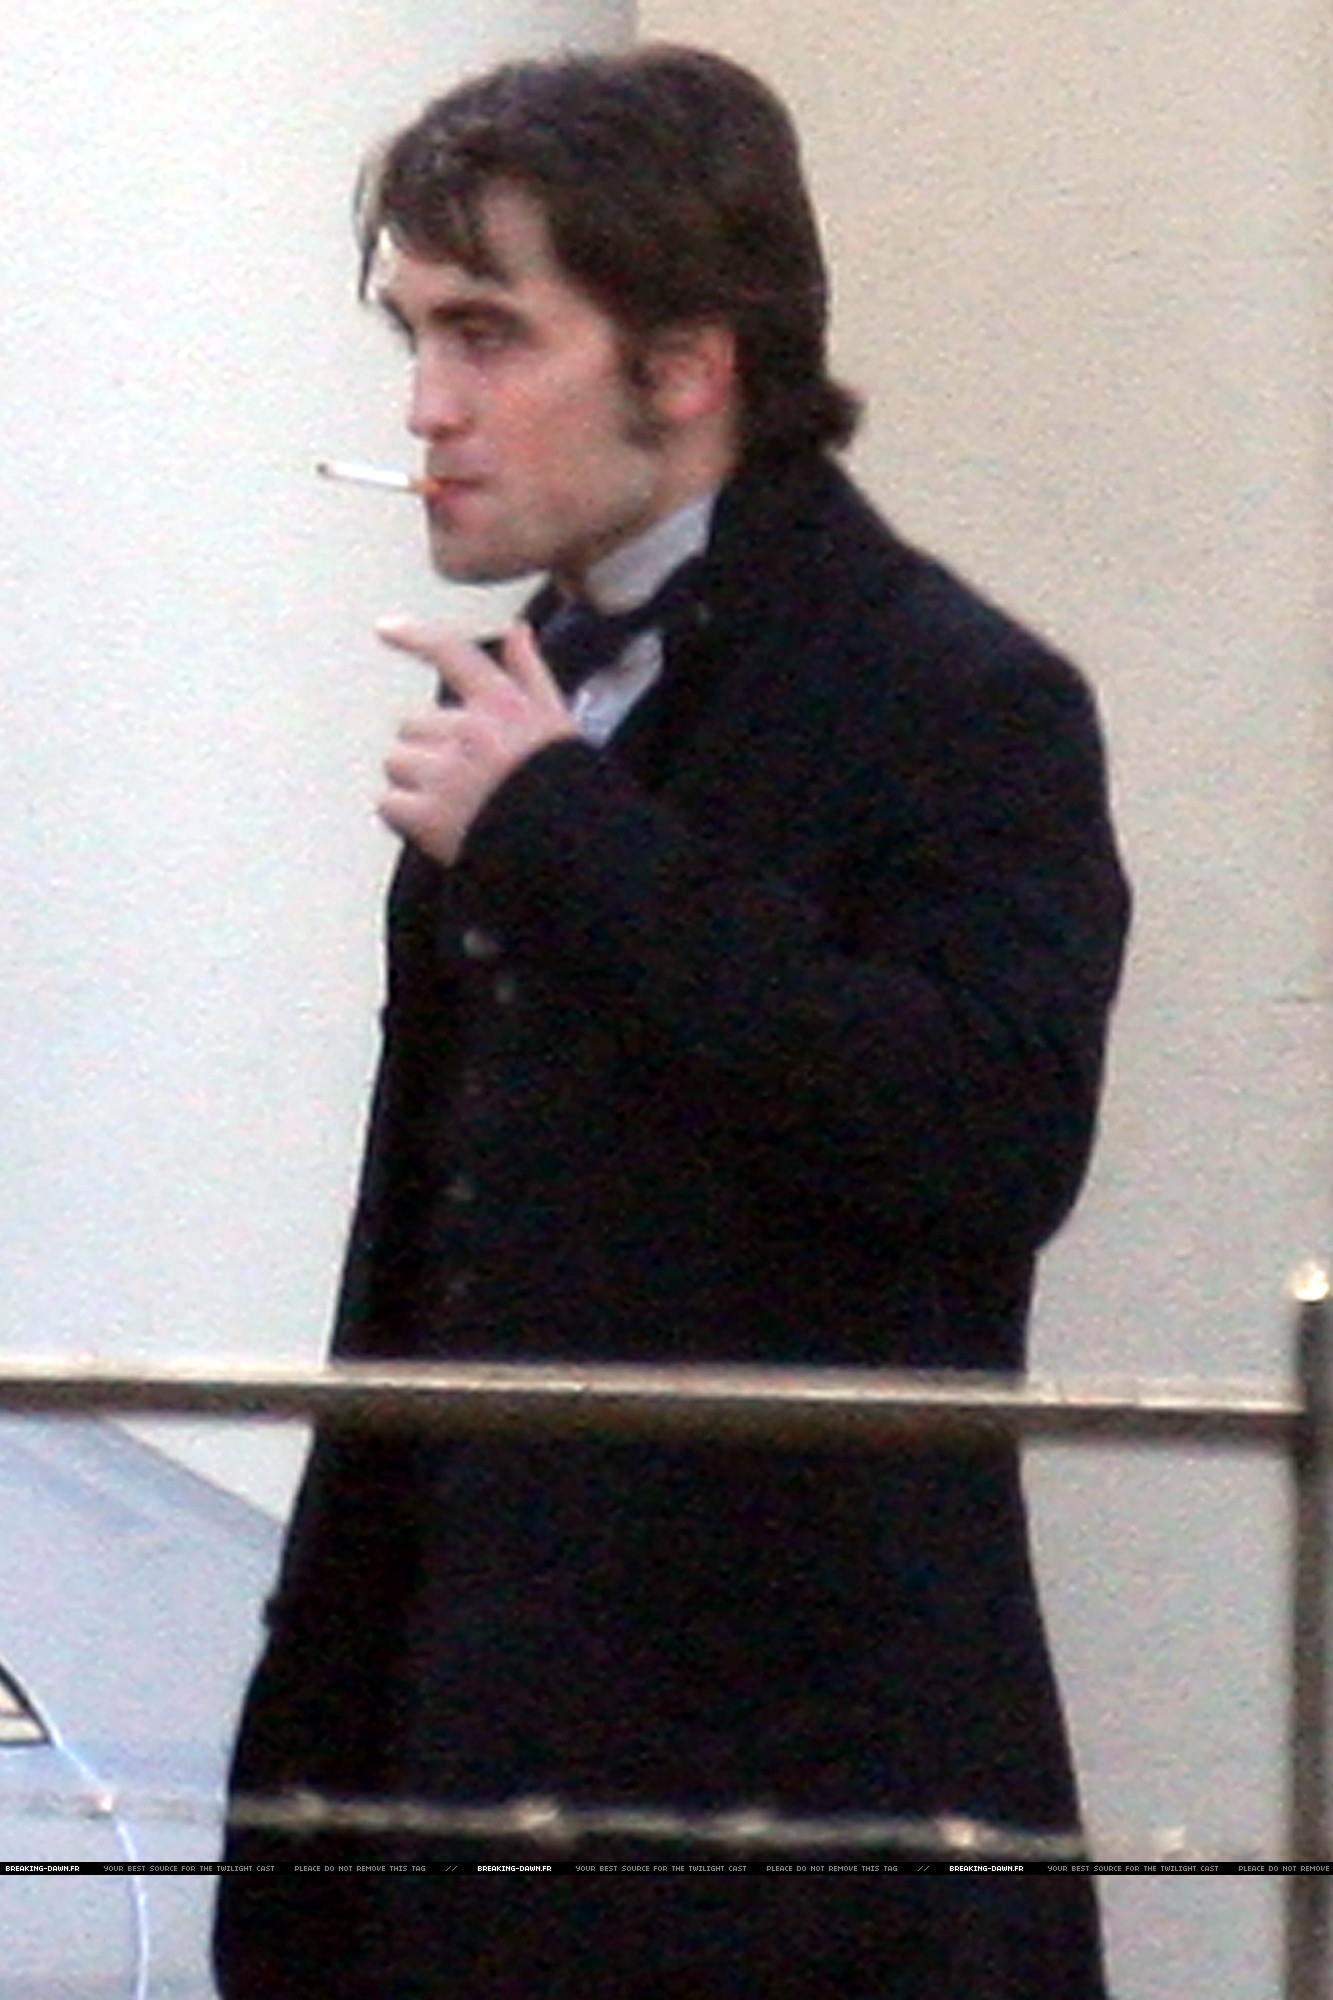 First Pics from Bel Ami Set: Robert Pattinson is Georges Duroy | BelAmiFilm.com ...1333 x 2000